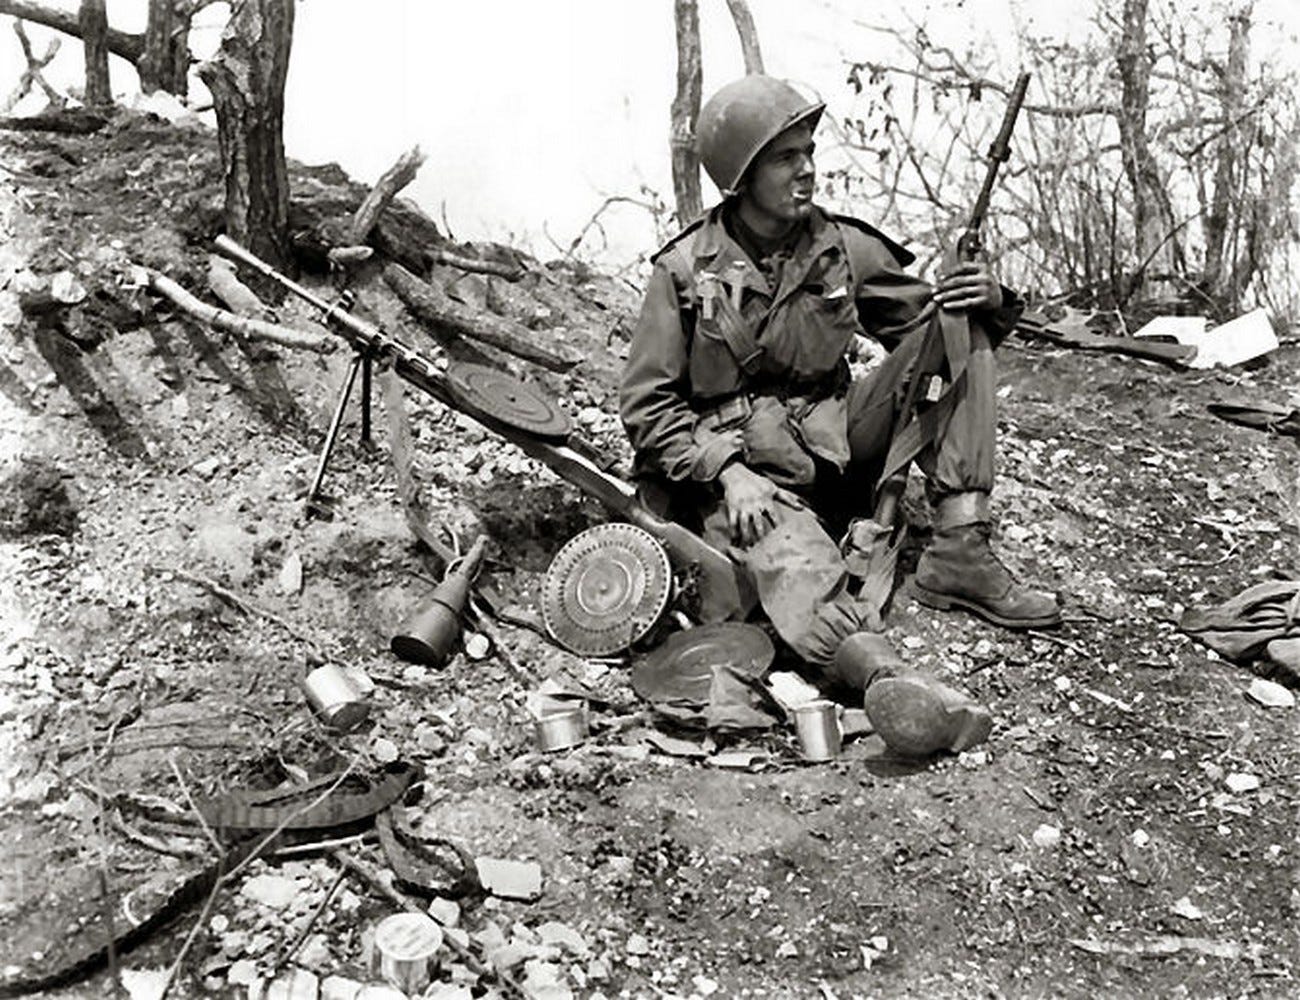 Pfc. Julias Van Den Stock of Company A, 32nd Regimental Combat Team, 7th Infantry Division, rests on a Chinese Communist bunker with a Soviet DP light machine gun, along the slope of Hill 902 north of Ip-Tong, 1951. U.S. Marine Corps photo. 